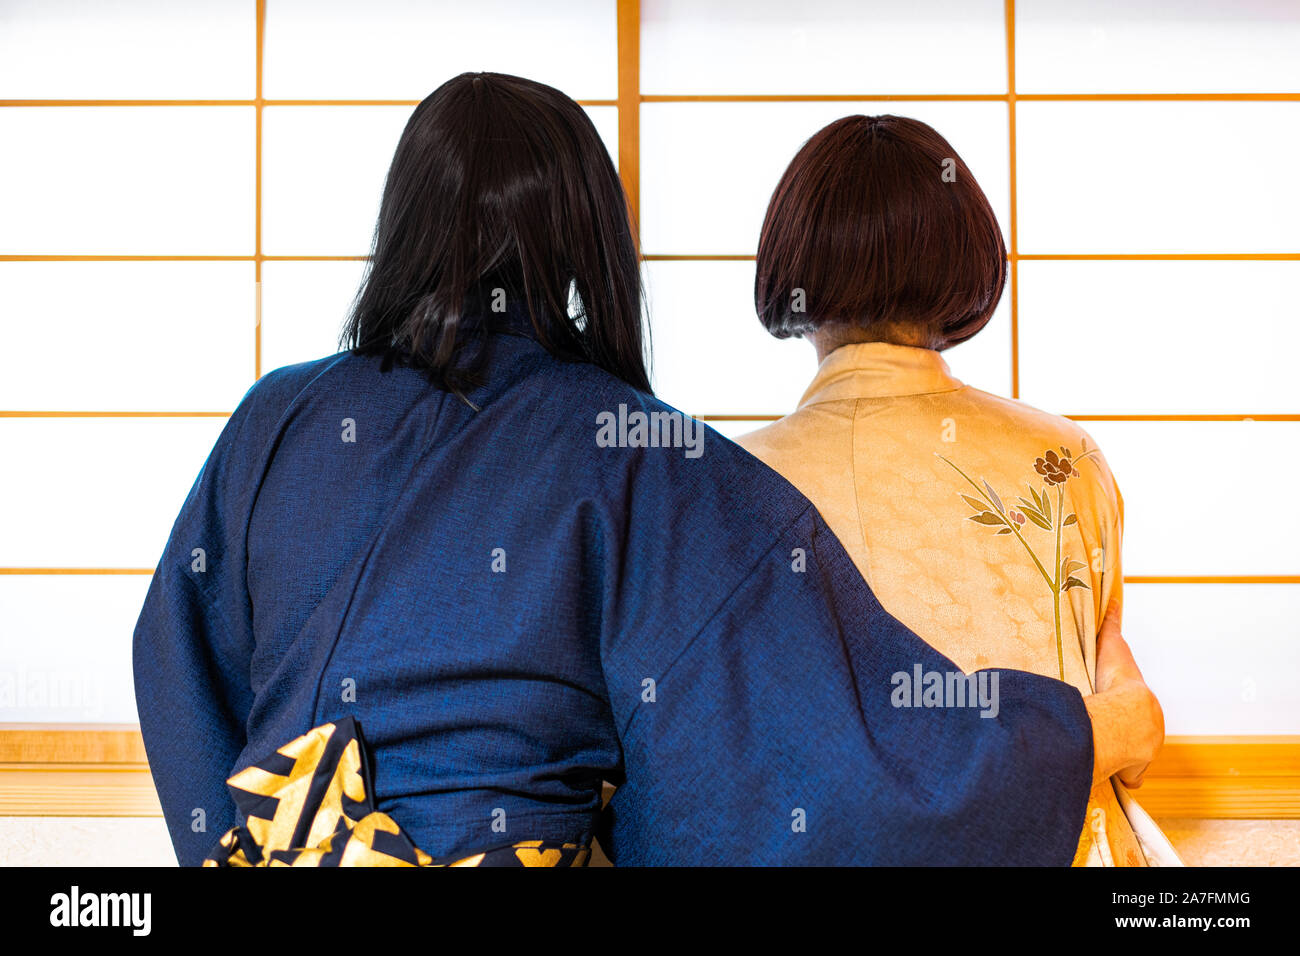 Traditional japanese house sliding door window with romantic woman and man couple in kimono costume standing Stock Photo